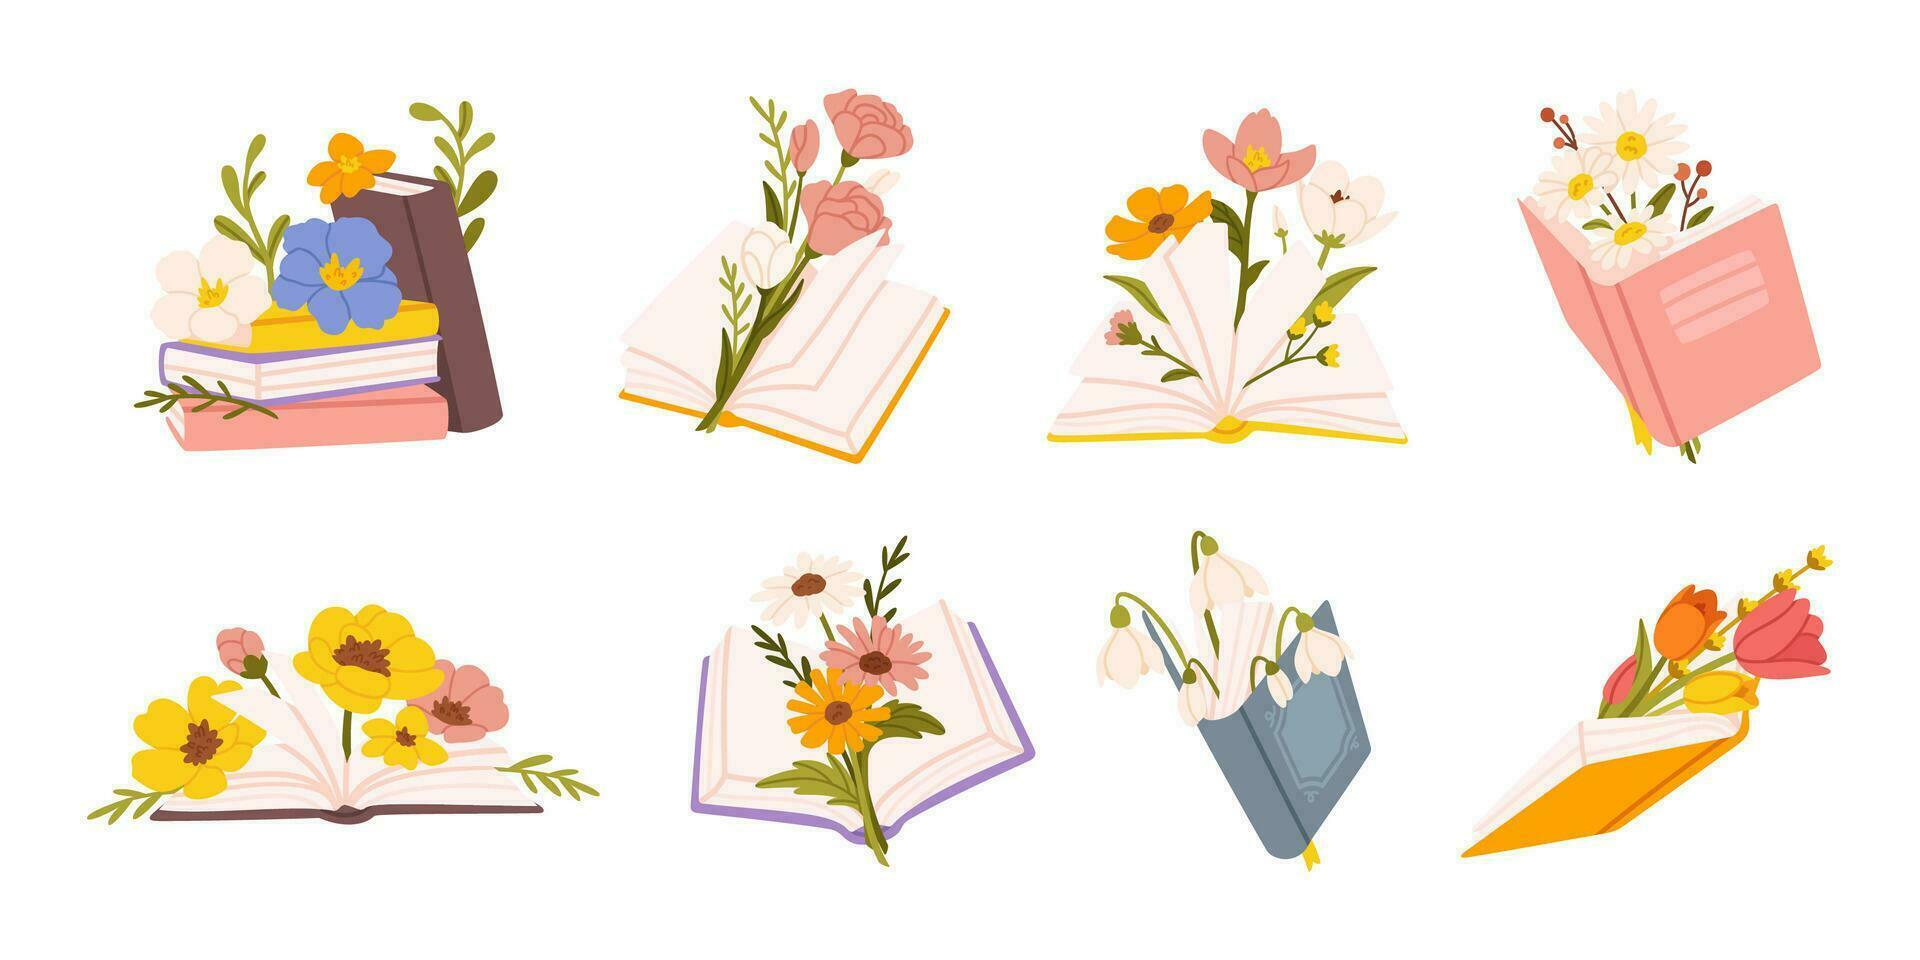 Books and flowers. Wildflowers bouquet for good romantic literature poetry, romance novels. Tulips and roses snowdrops and daisies cornflowers decorate open book. Vector set